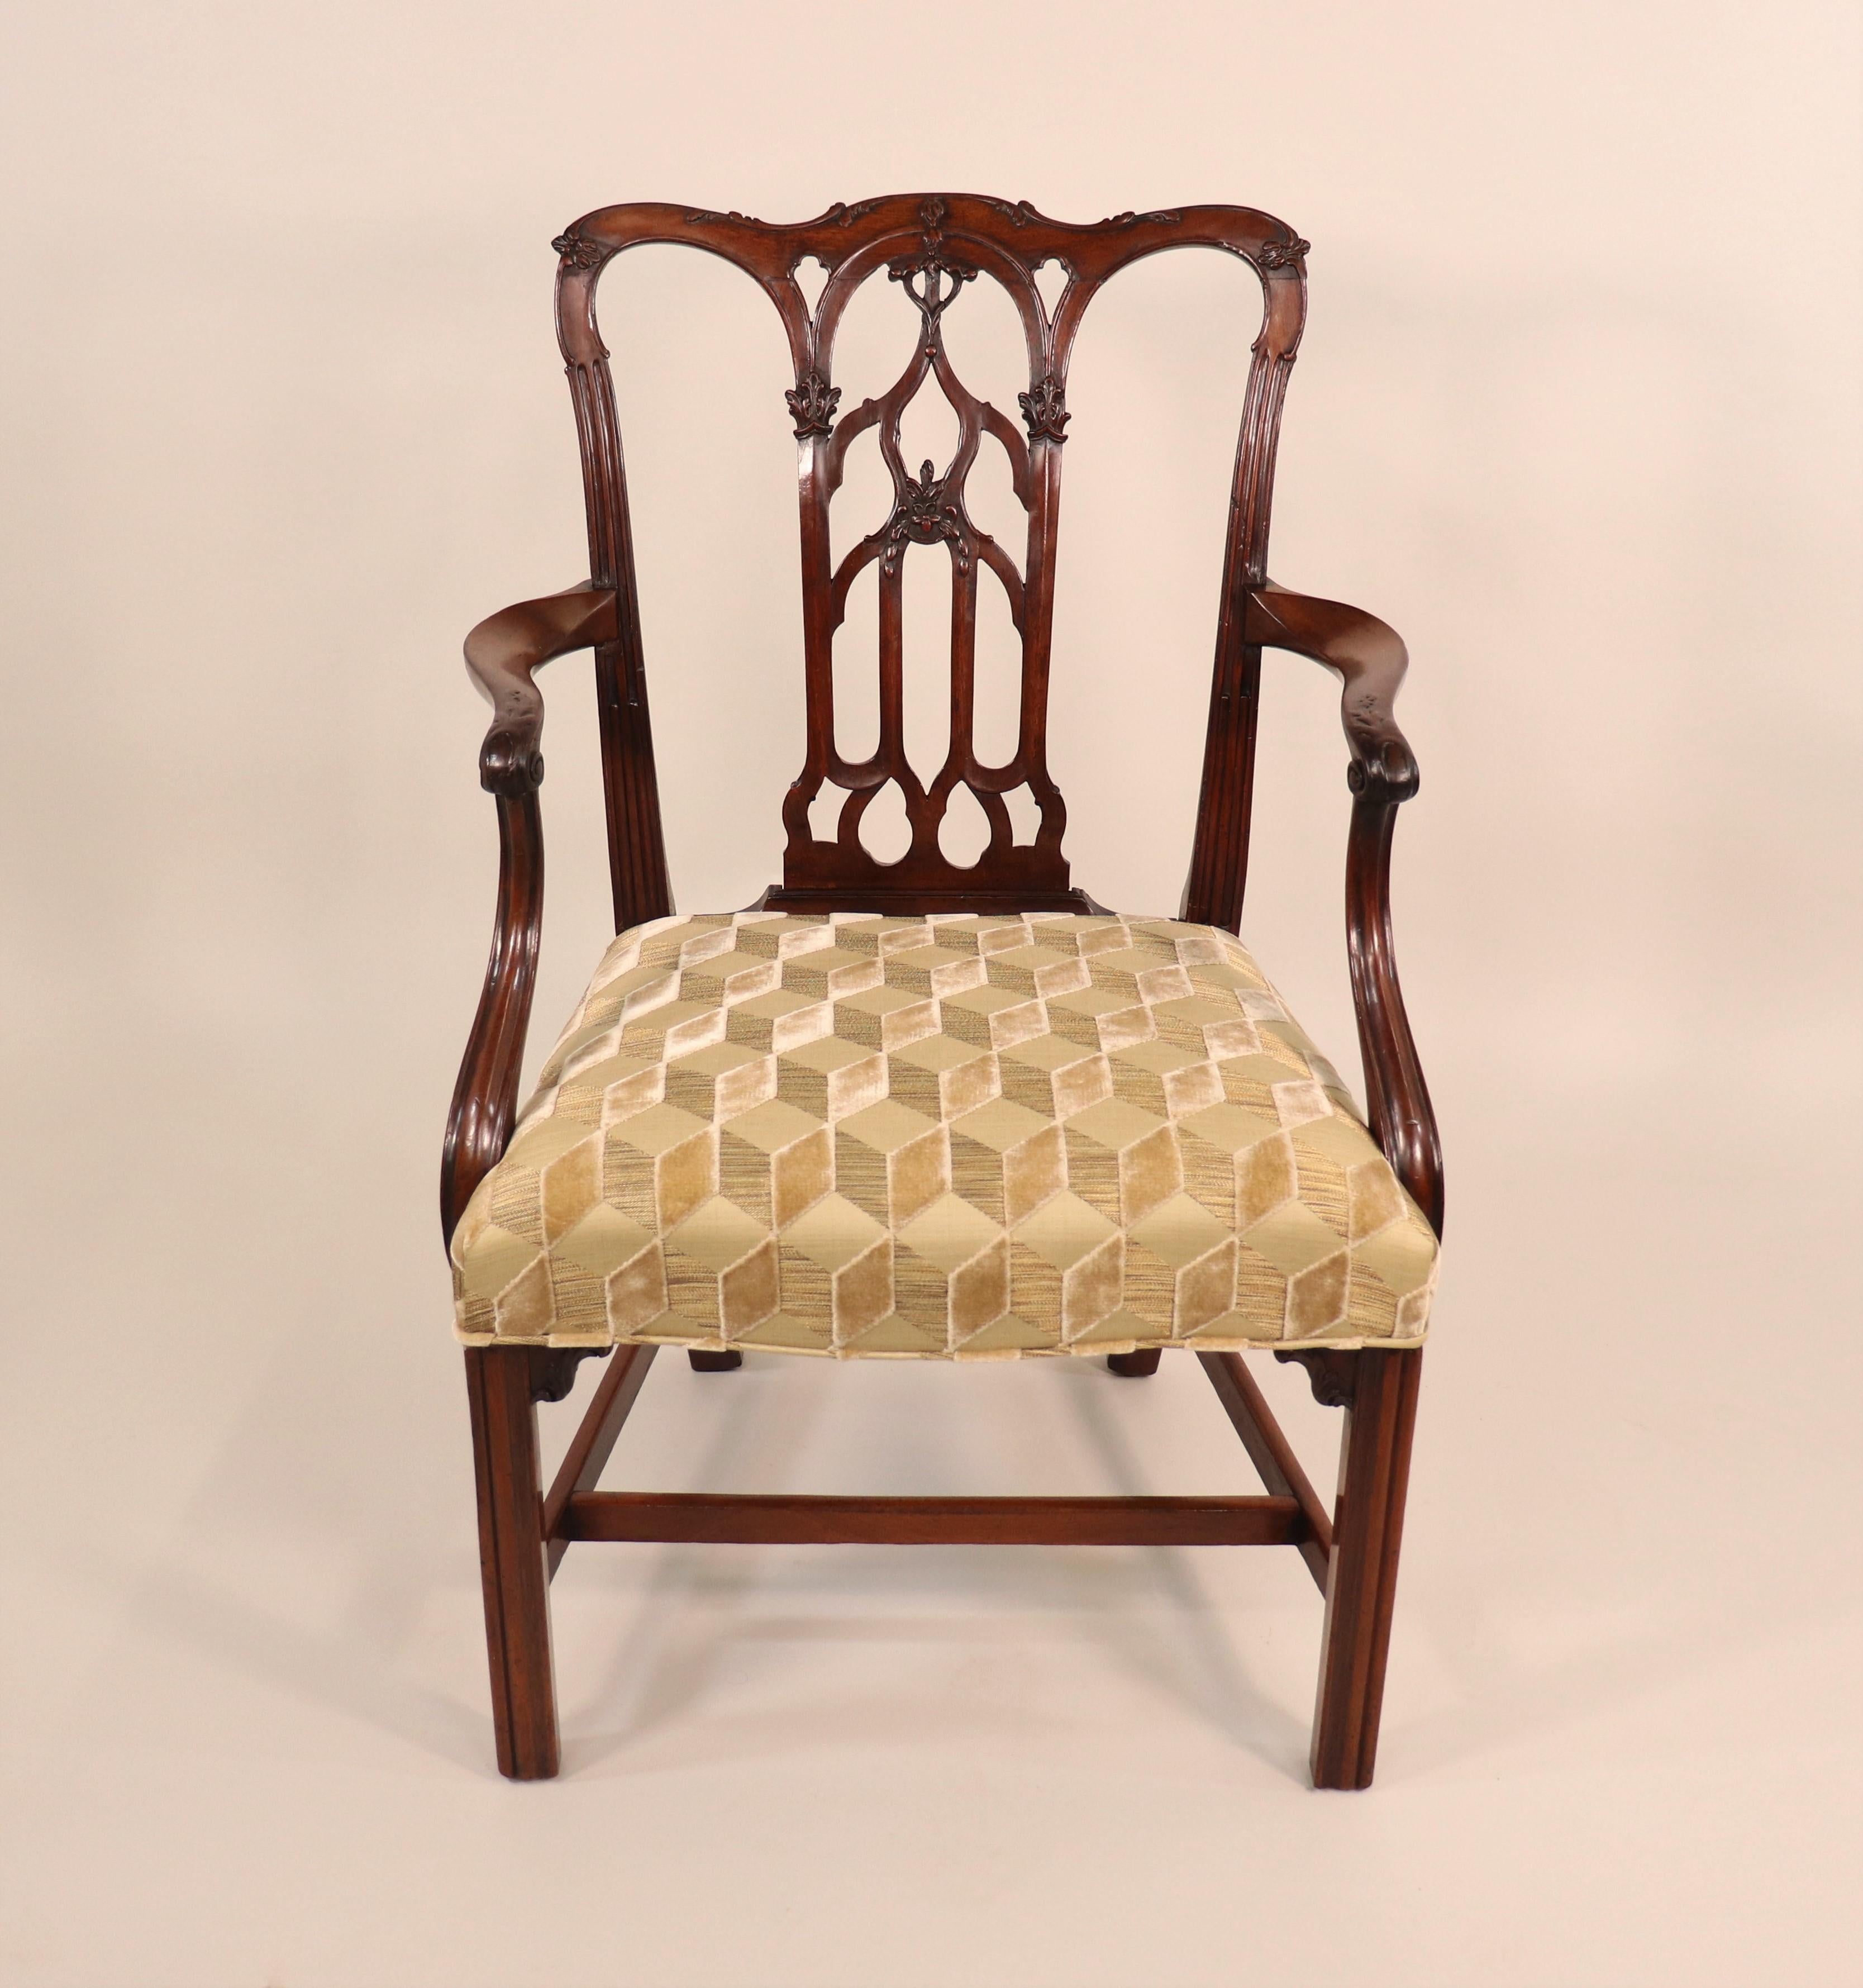 Circa 1750 English Georgian II period mahogany armchair. The George II period was most noted for its intricate chairs. Like the other Georgian periods, this one was named after the monarch during the time. Under George II, mahogany became the